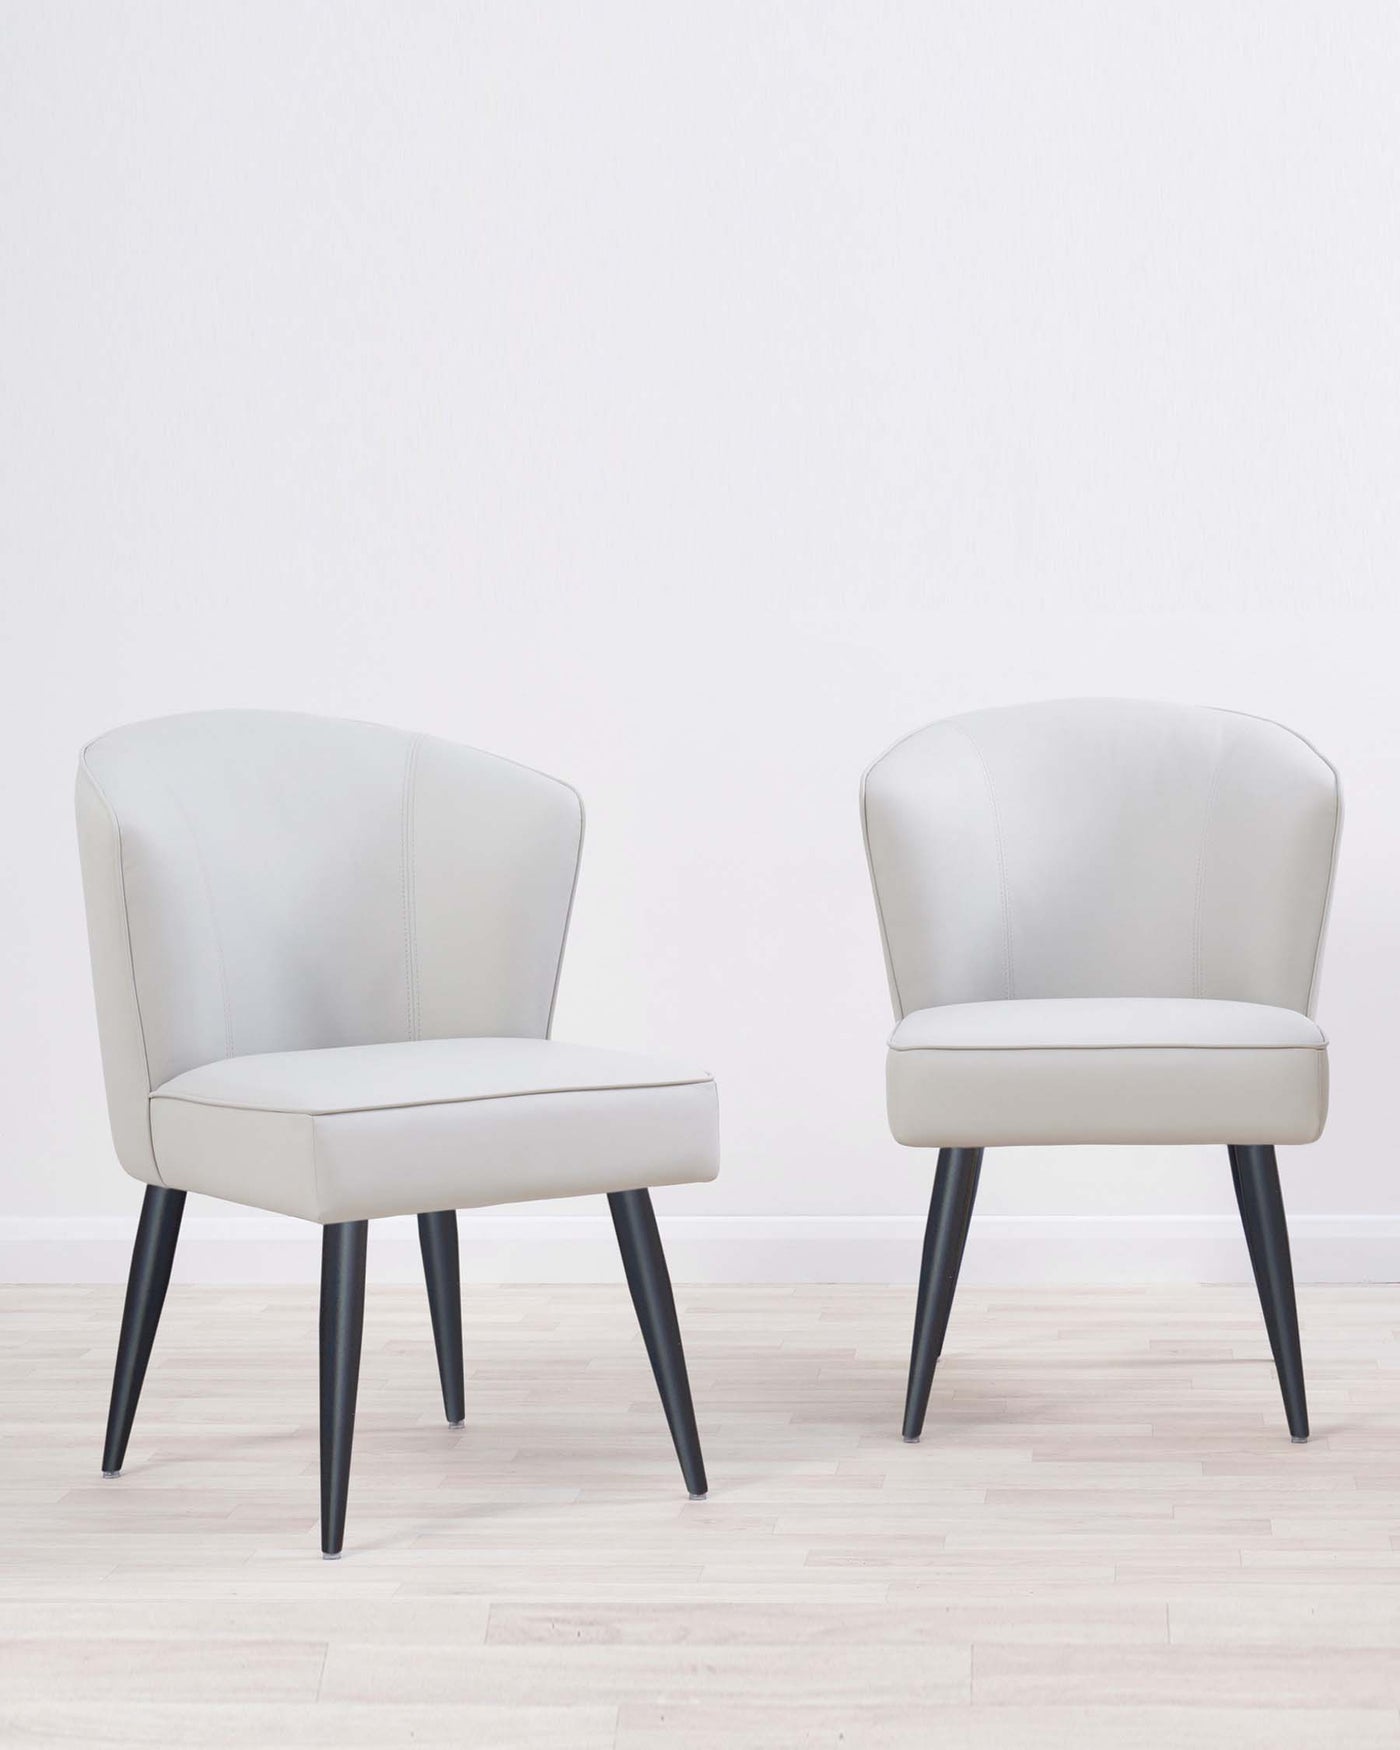 Two modern mid-century accent chairs with light grey upholstery and angled black wooden legs.